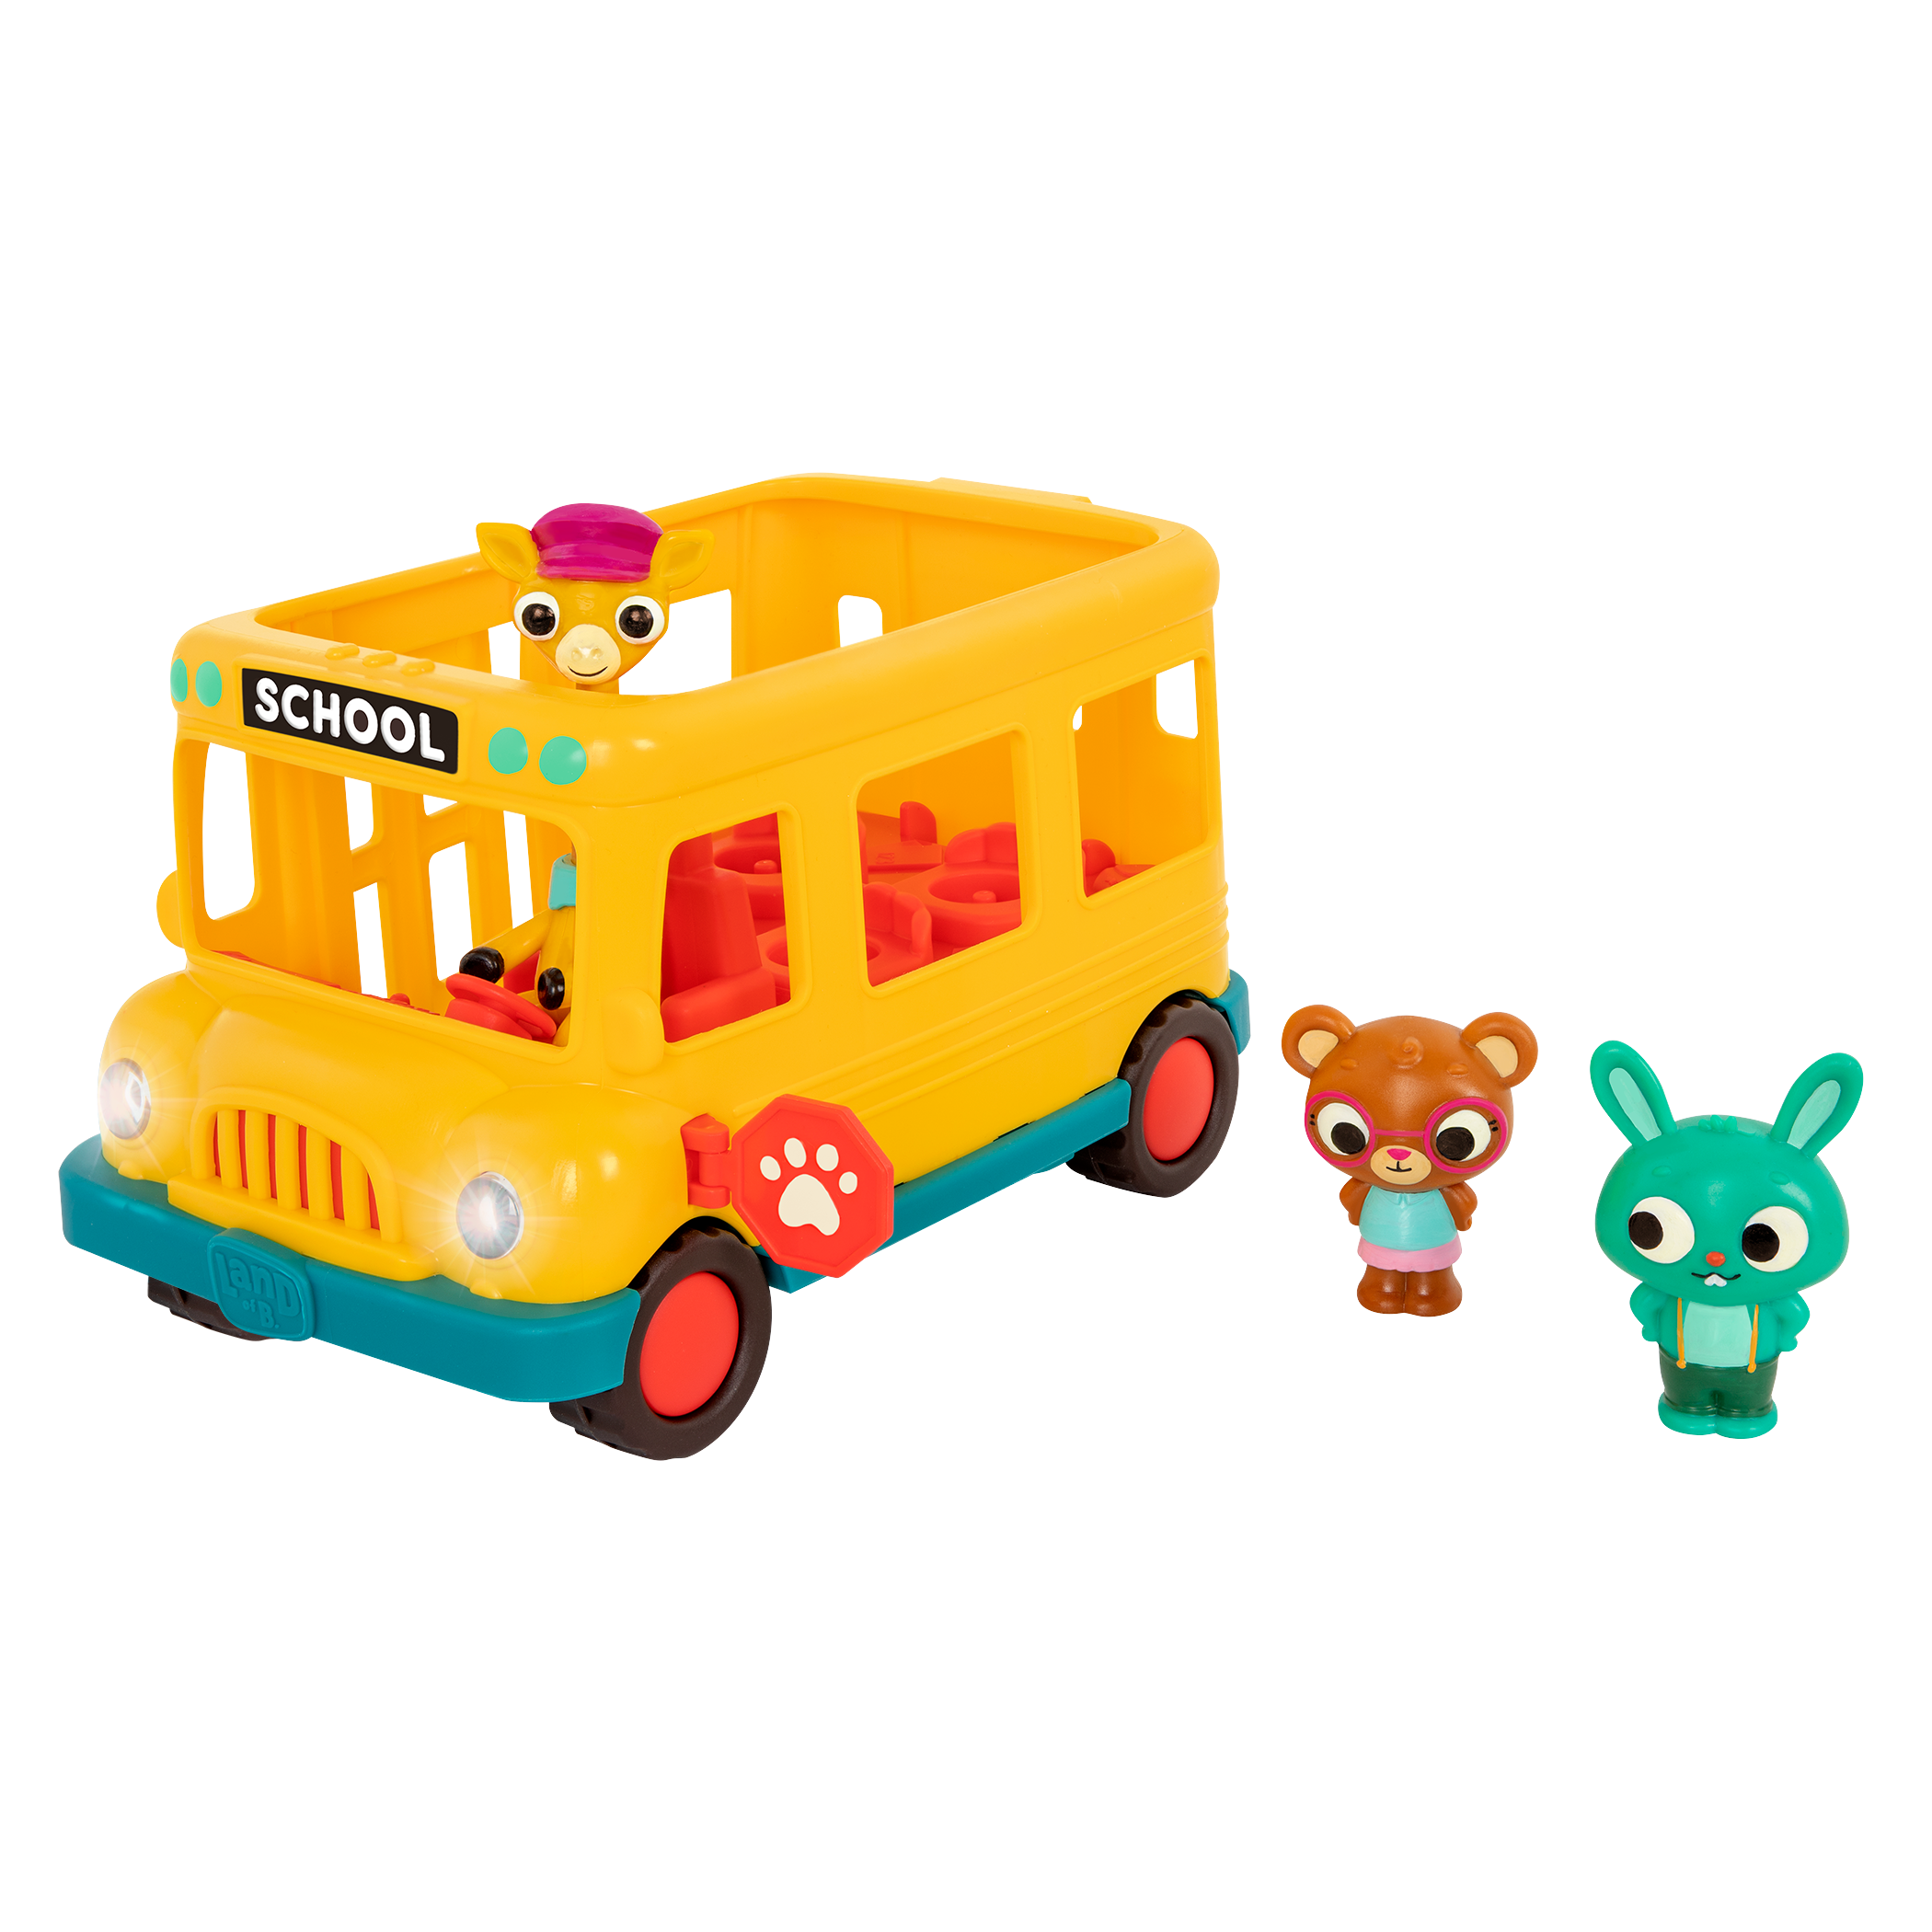 Toy school bus with animal characters.